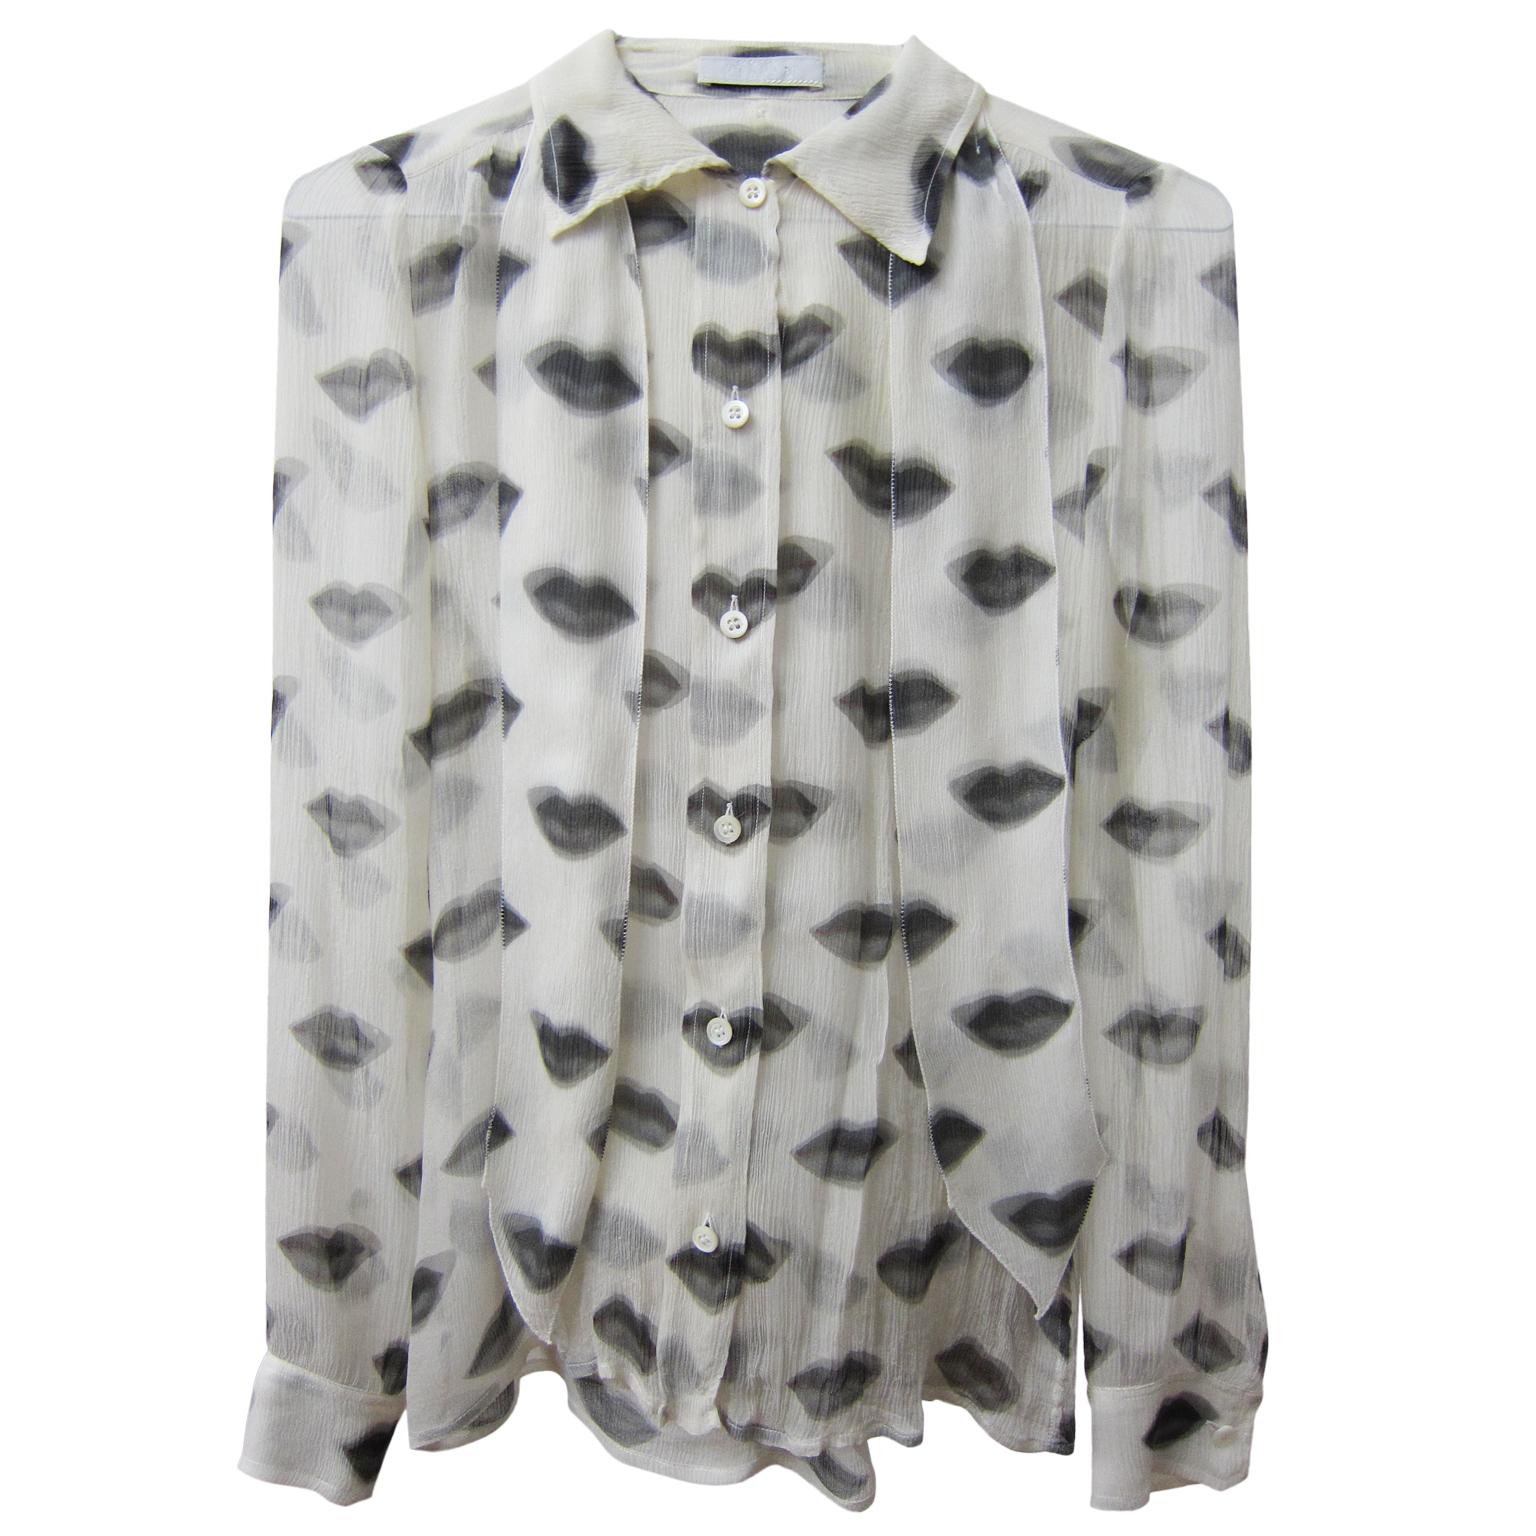 Prada blouse featuring the iconic lip print which was highly documented from ss 2000 collection. 100% Silk.
Made in Italy.
Size : IT 44
Shoulder : 34cm
Length : 61 cm
Sleeve : 60 cm
Under arm : 46 cm